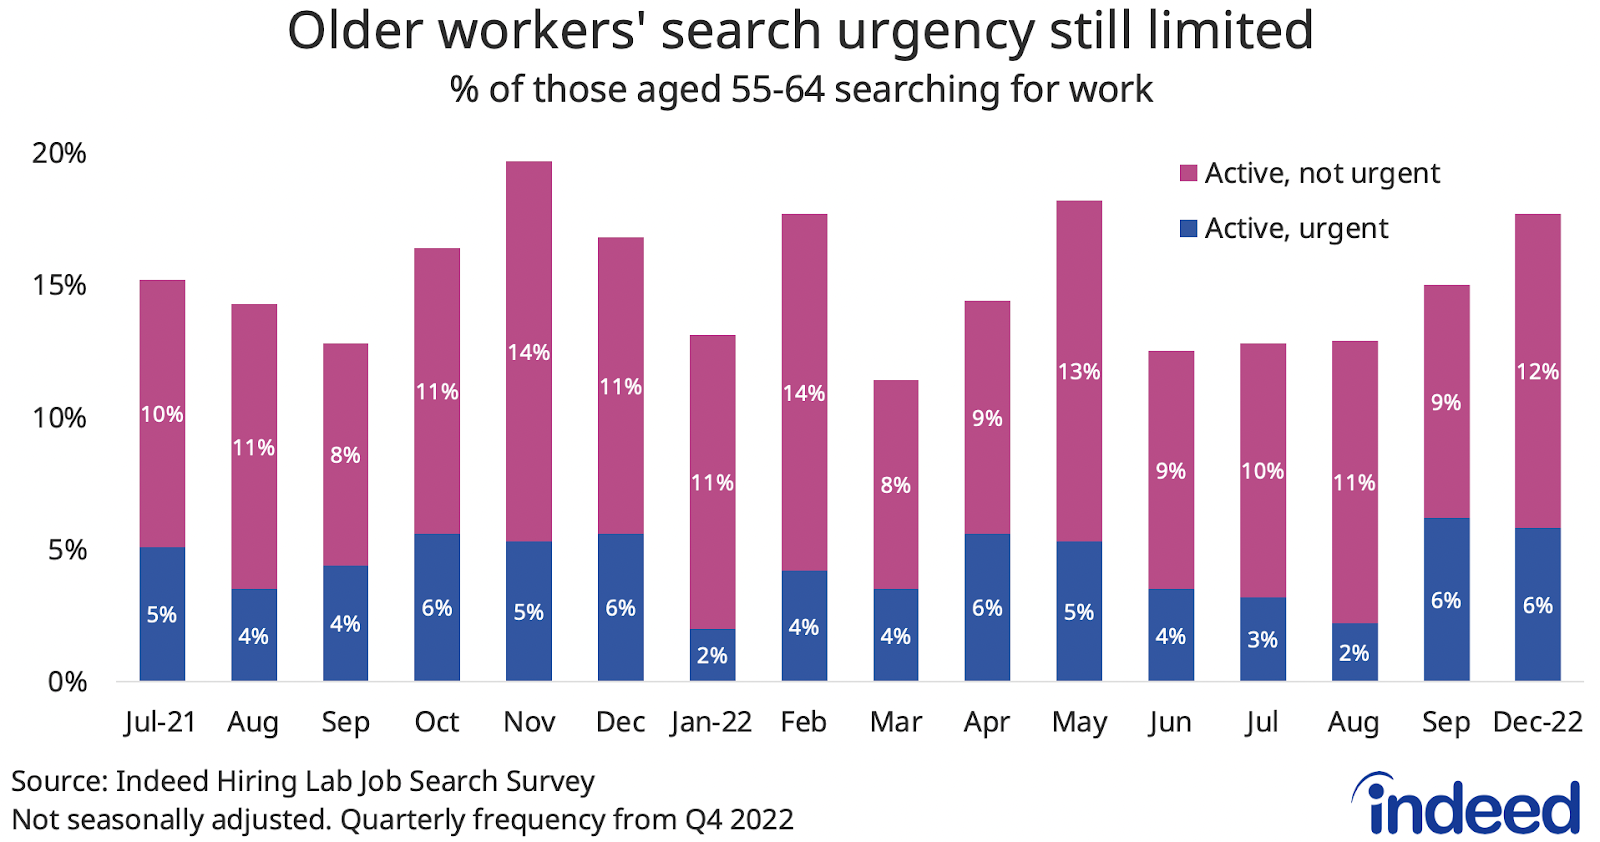 A bar chart titled “Older workers’ search urgency still limited” showing active urgent and non-urgent job search among people aged 55-64 in Indeed Hiring Lab’s Job Search Survey.